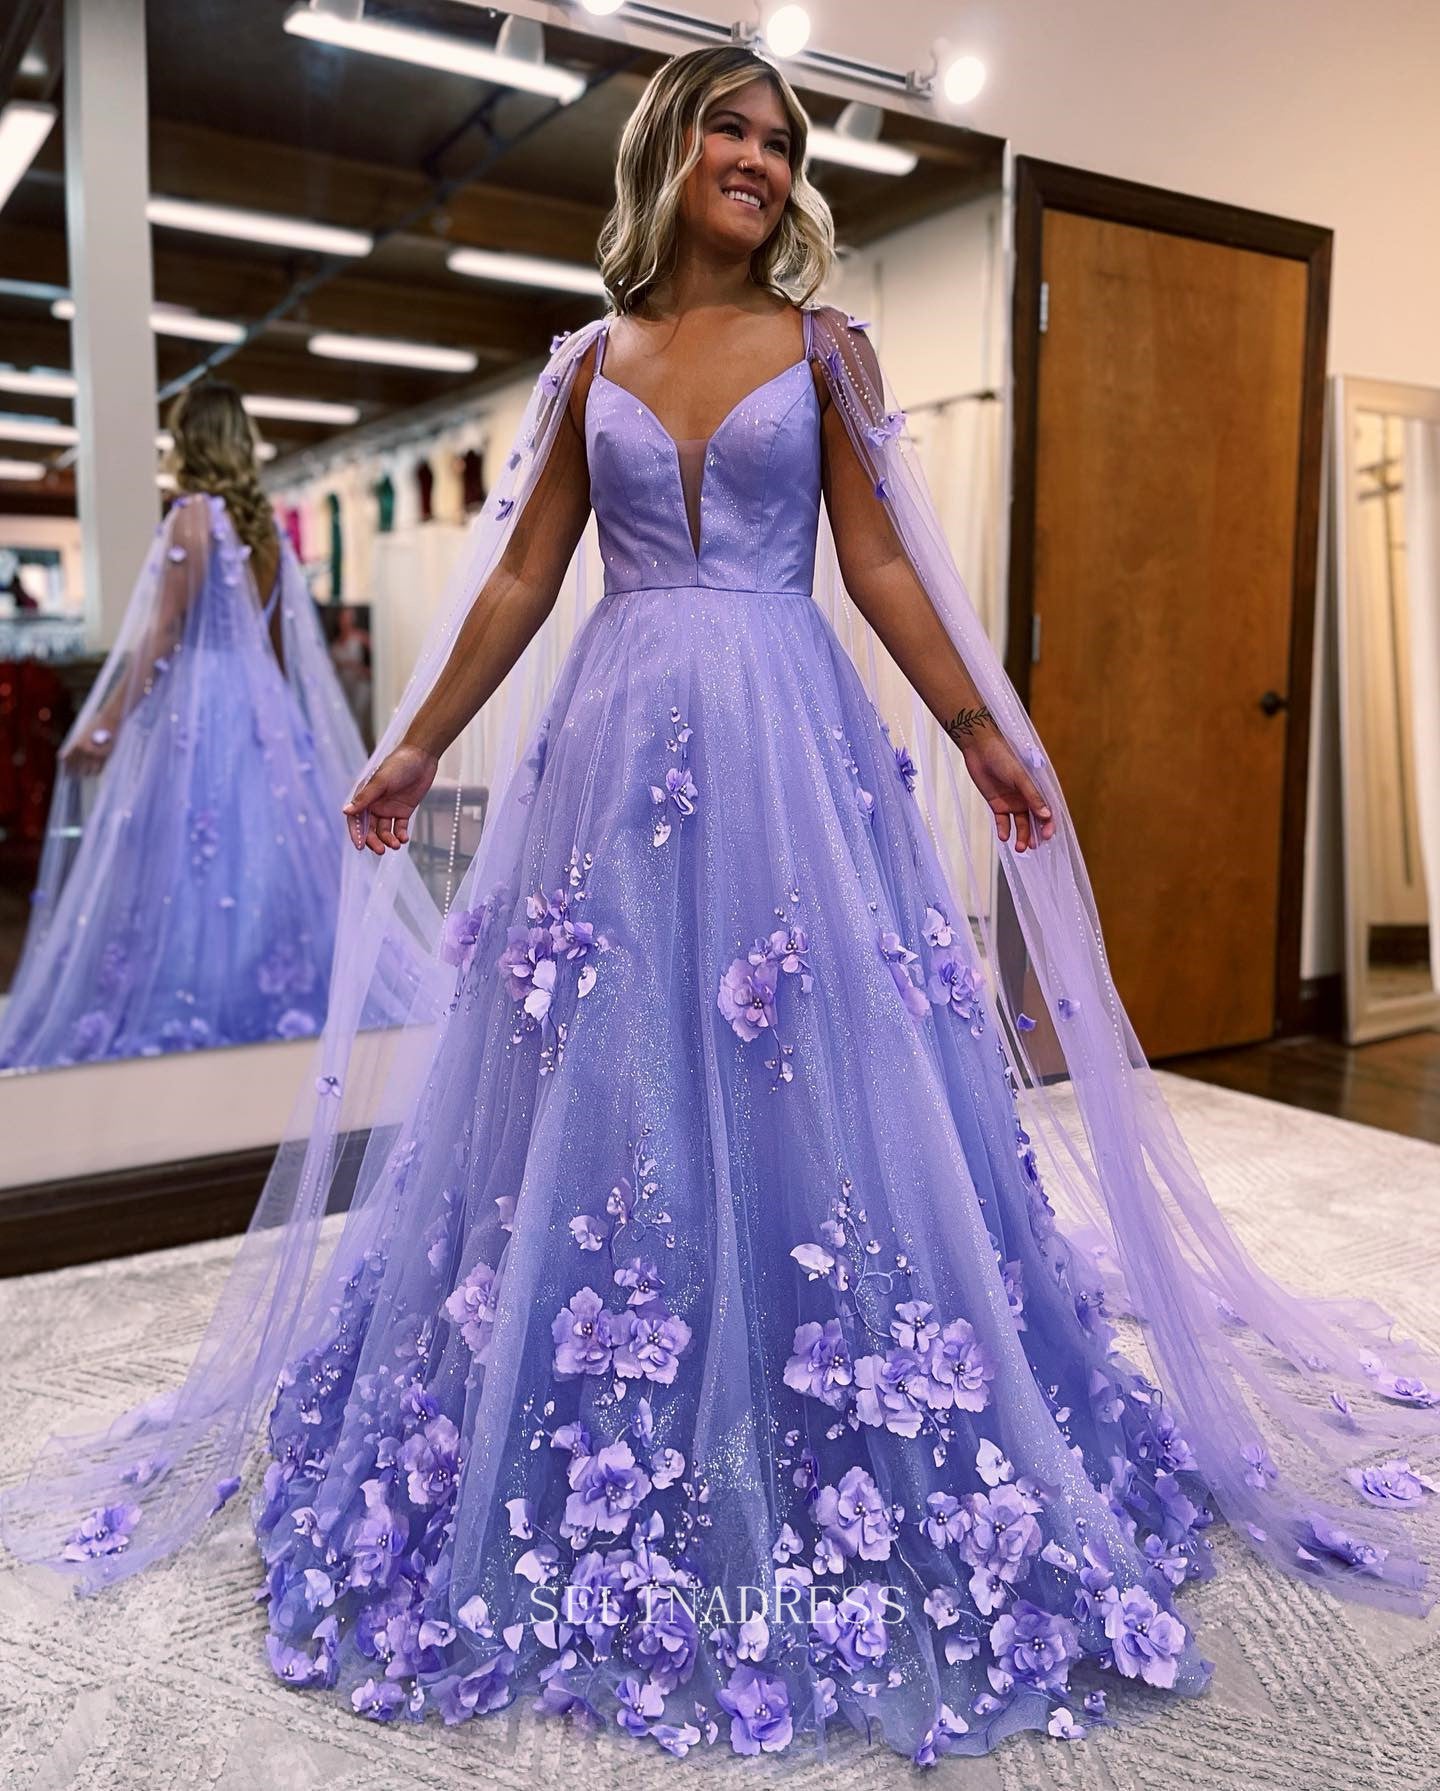 Lavender Off Shoulder Quinceanera Dresses with Big Bow Sweet 16 Prom Ball  Gown | eBay